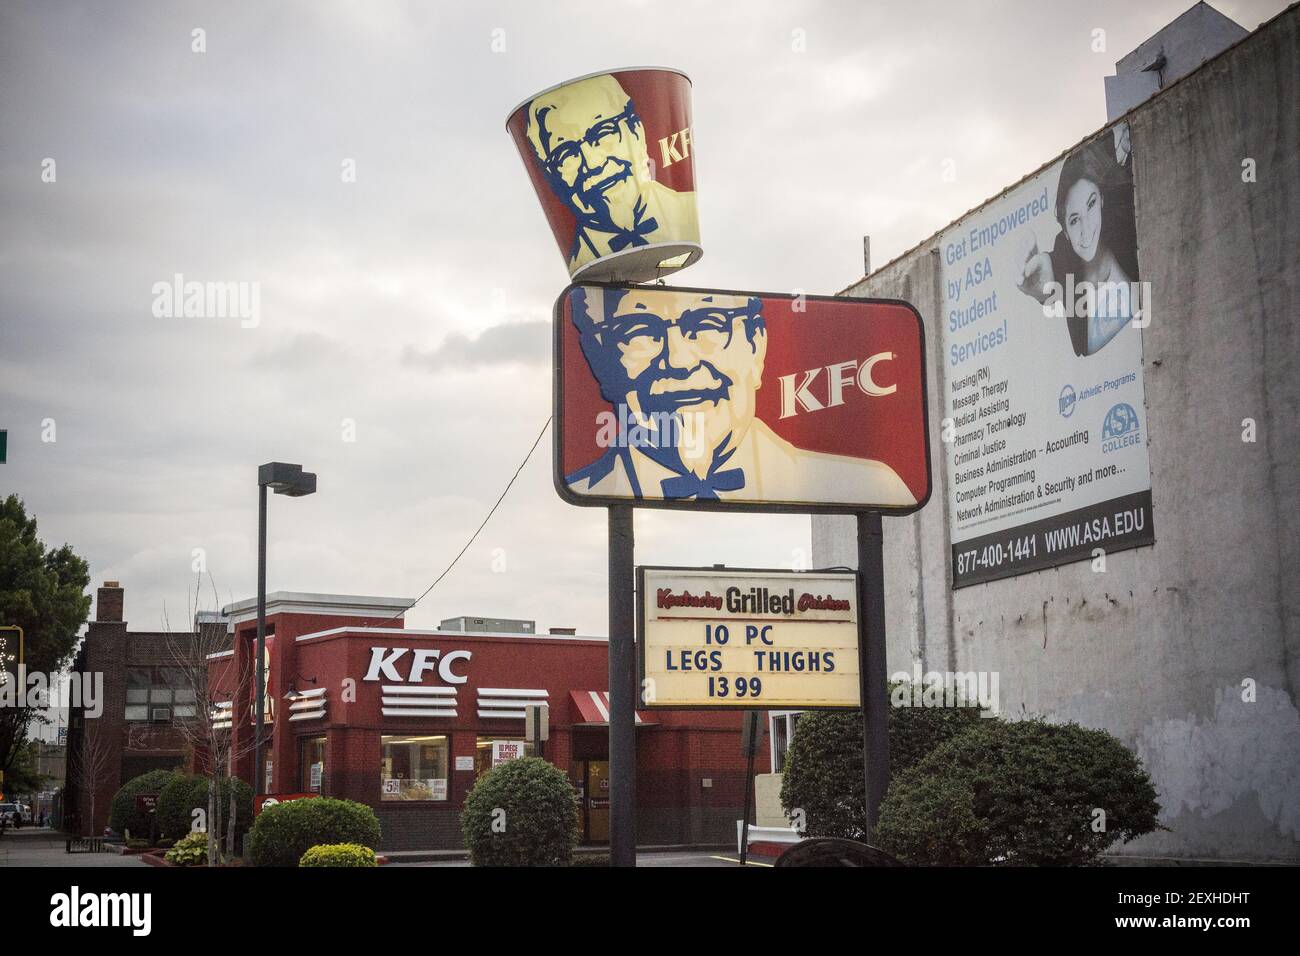 A Kentucky Fried Chicken franchise restaurant is seen in the Sunset Park neighborhood of Brooklyn in New York on Tuesday, September 30, 2014. Yum Brands is reported that its KFC chain will curb the use of antibiotics in its chicken supply chain. McDonald's already has done so and Chick-Fil-A is in the process, expected to be completed in 2018. (Photo by Richard B. Levine) *** Please Use Credit from Credit Field *** Stock Photo